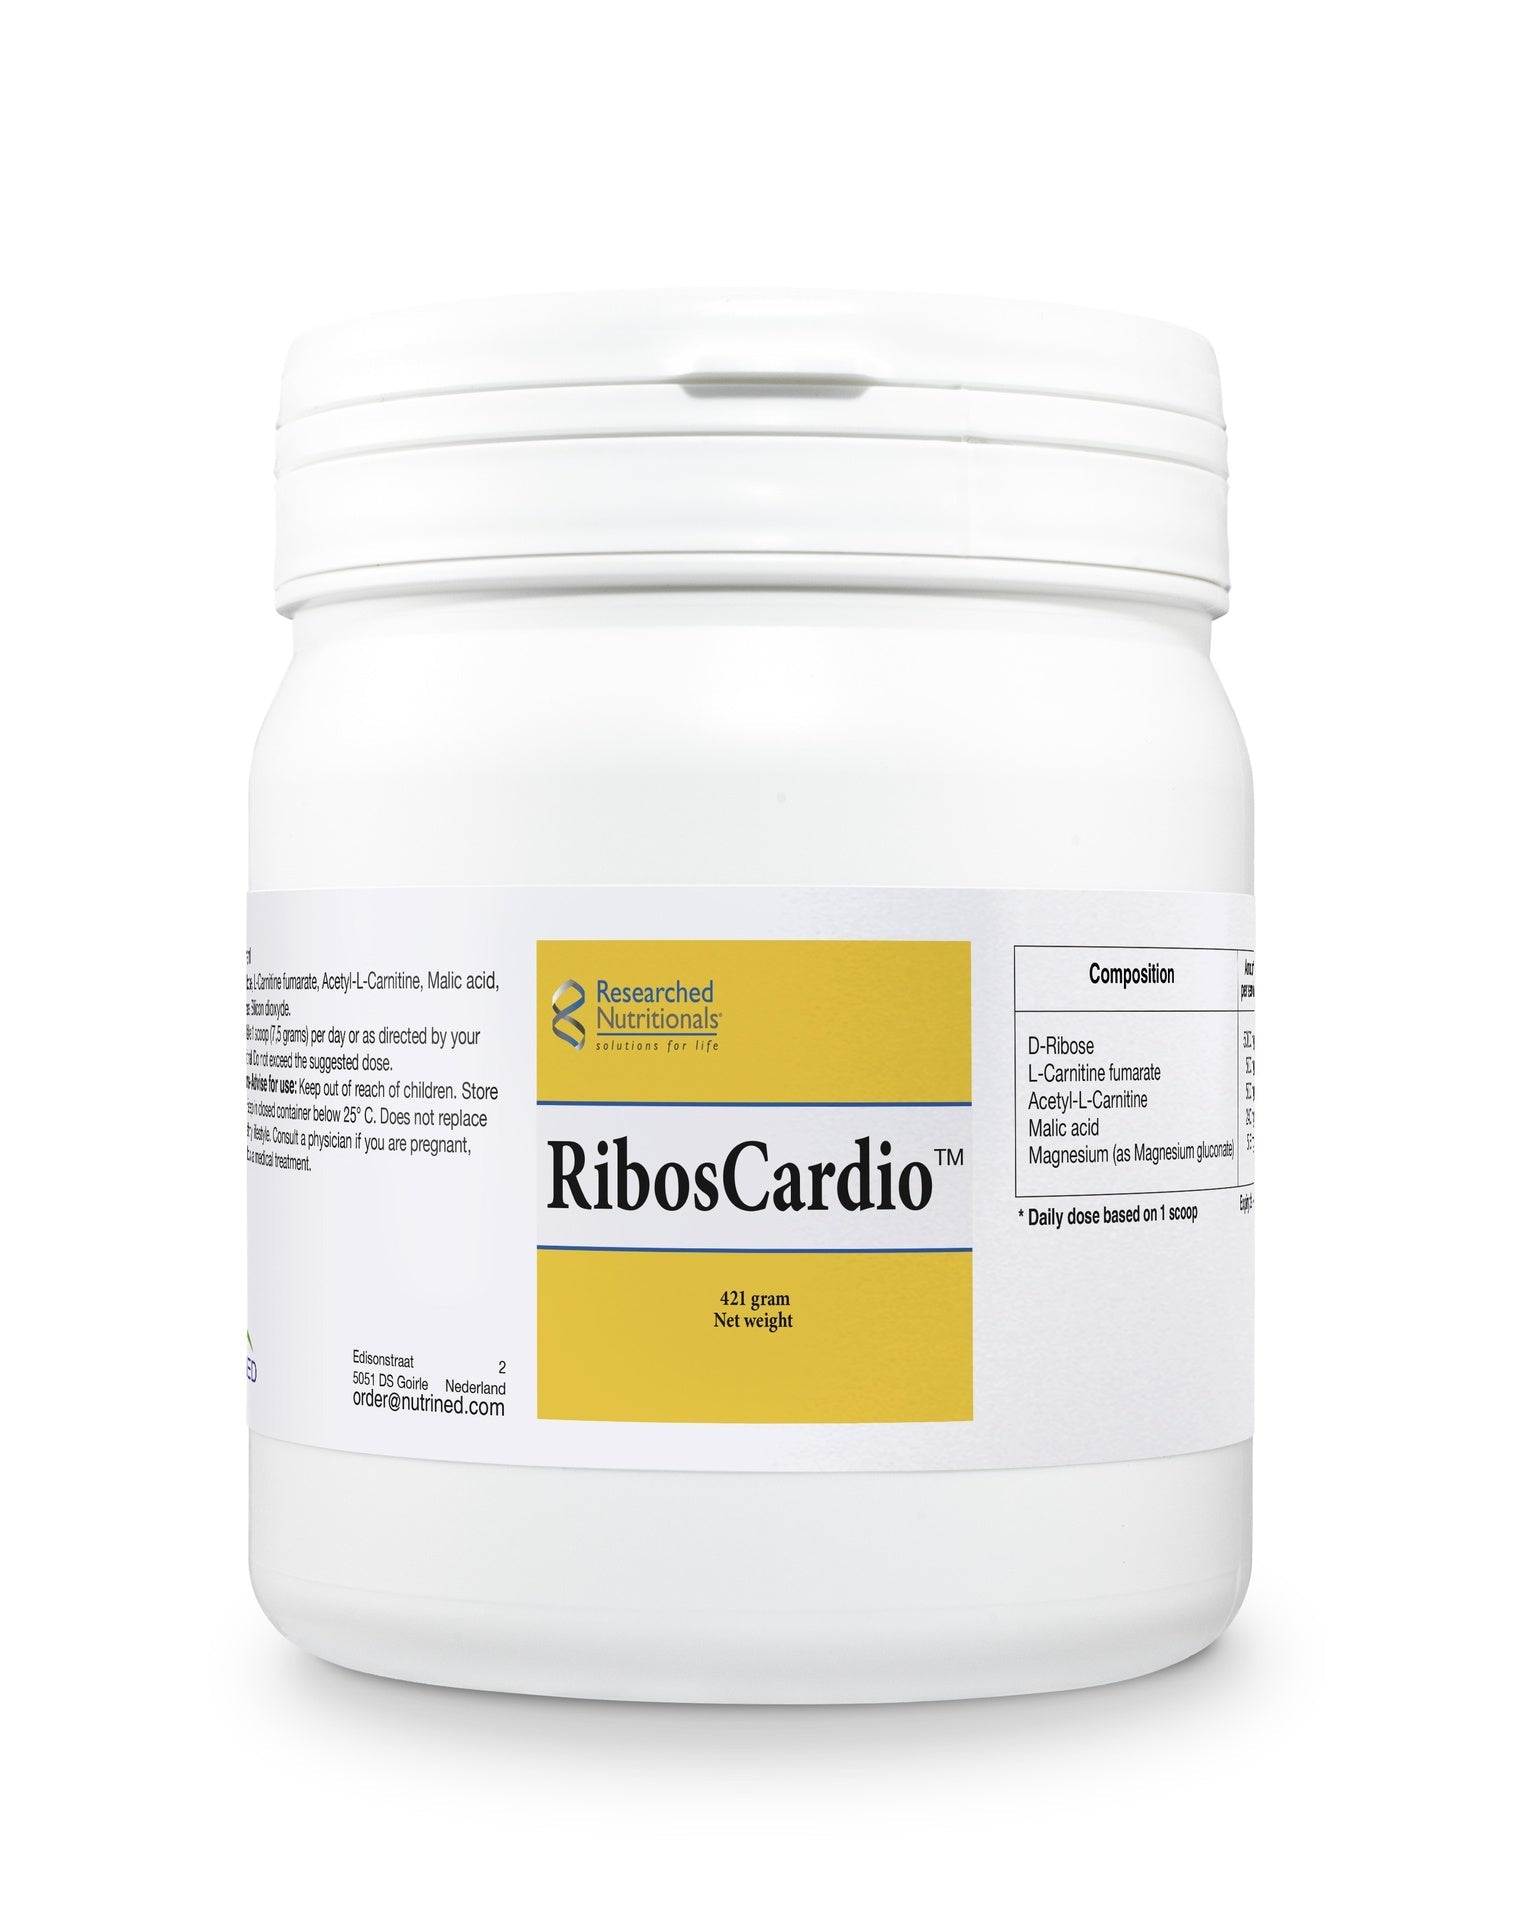 RibosCardio - 421g | Researched Nutritionals